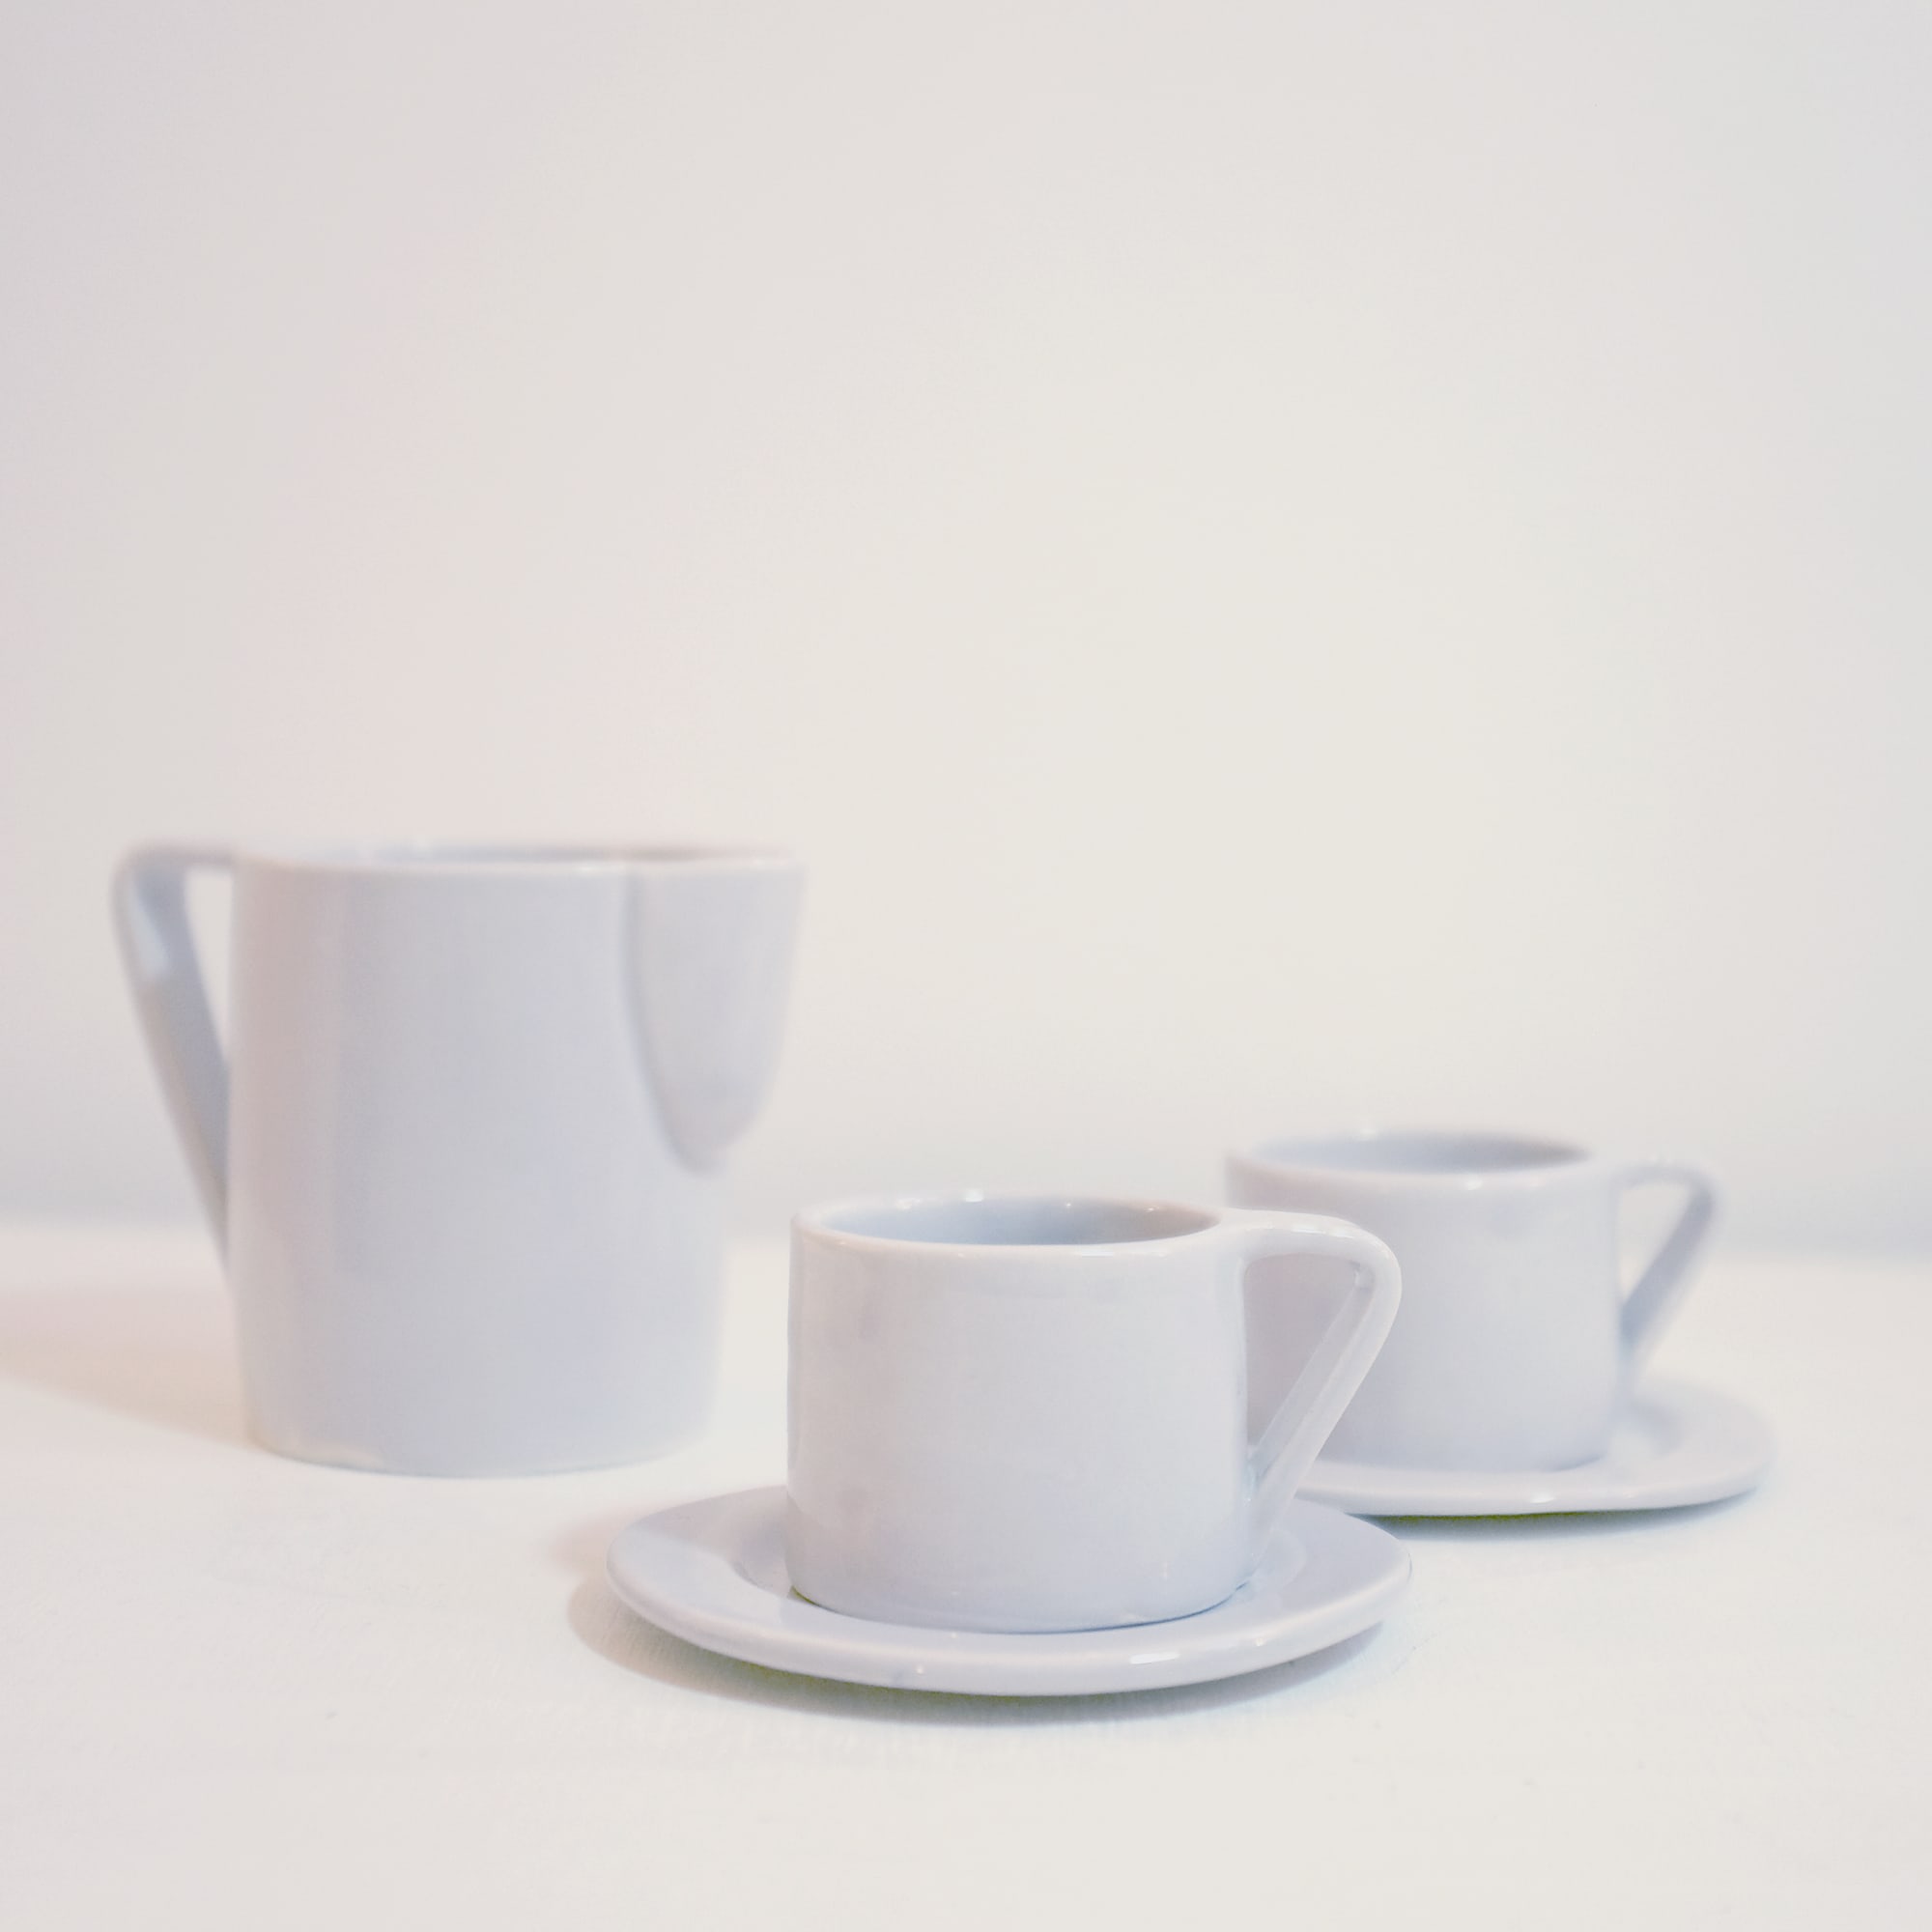 Milano Nebbia Set of 4 Espresso cups and saucers - Marta Benet